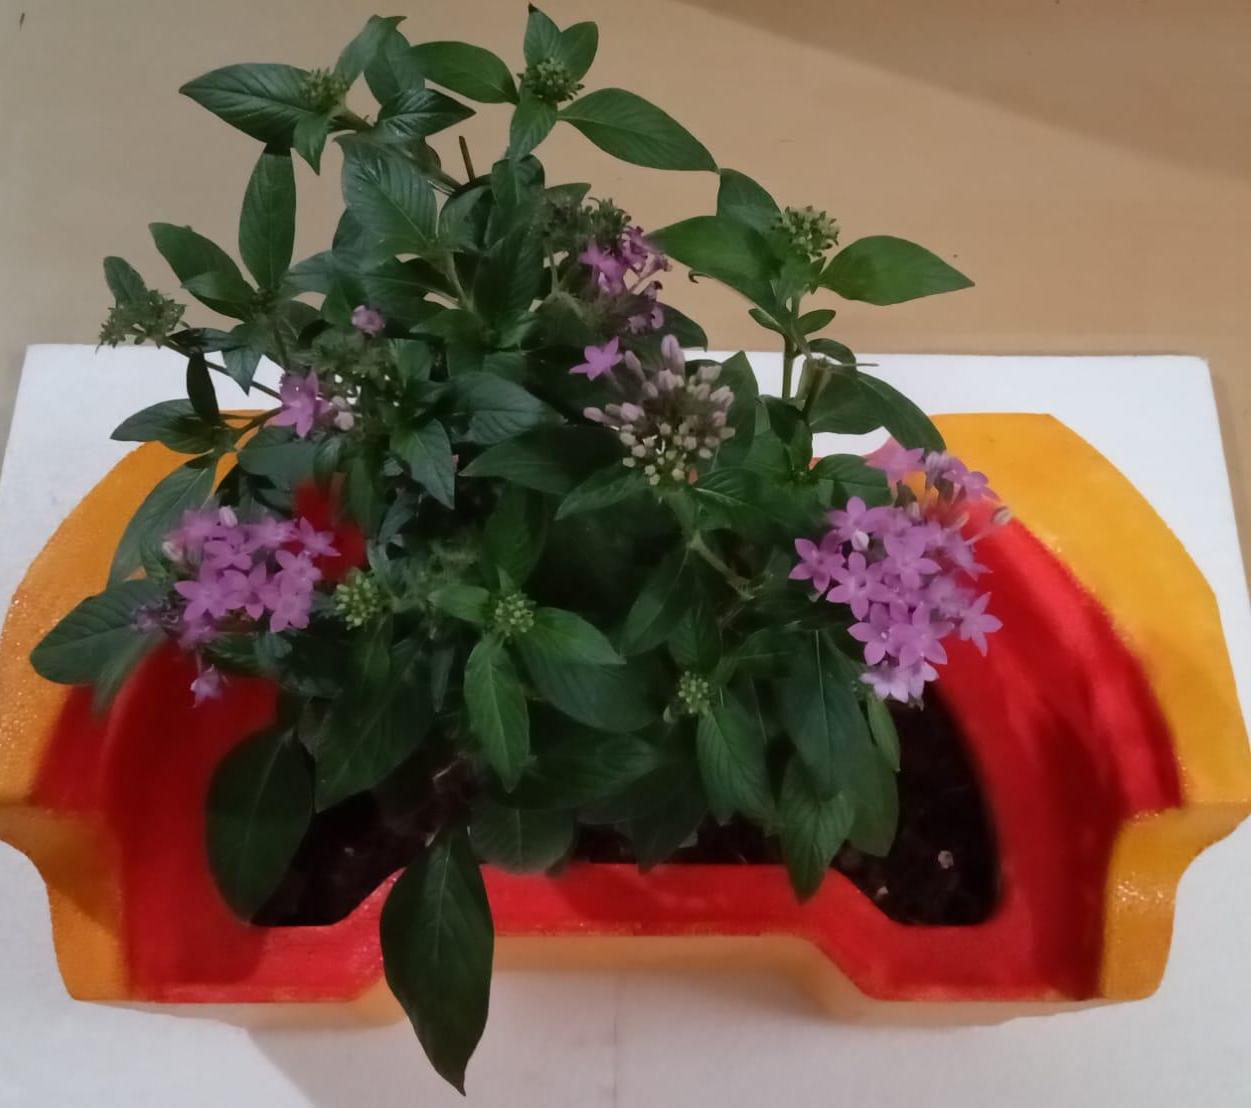 Making Useful Plant Pot From Waste Packaging Material